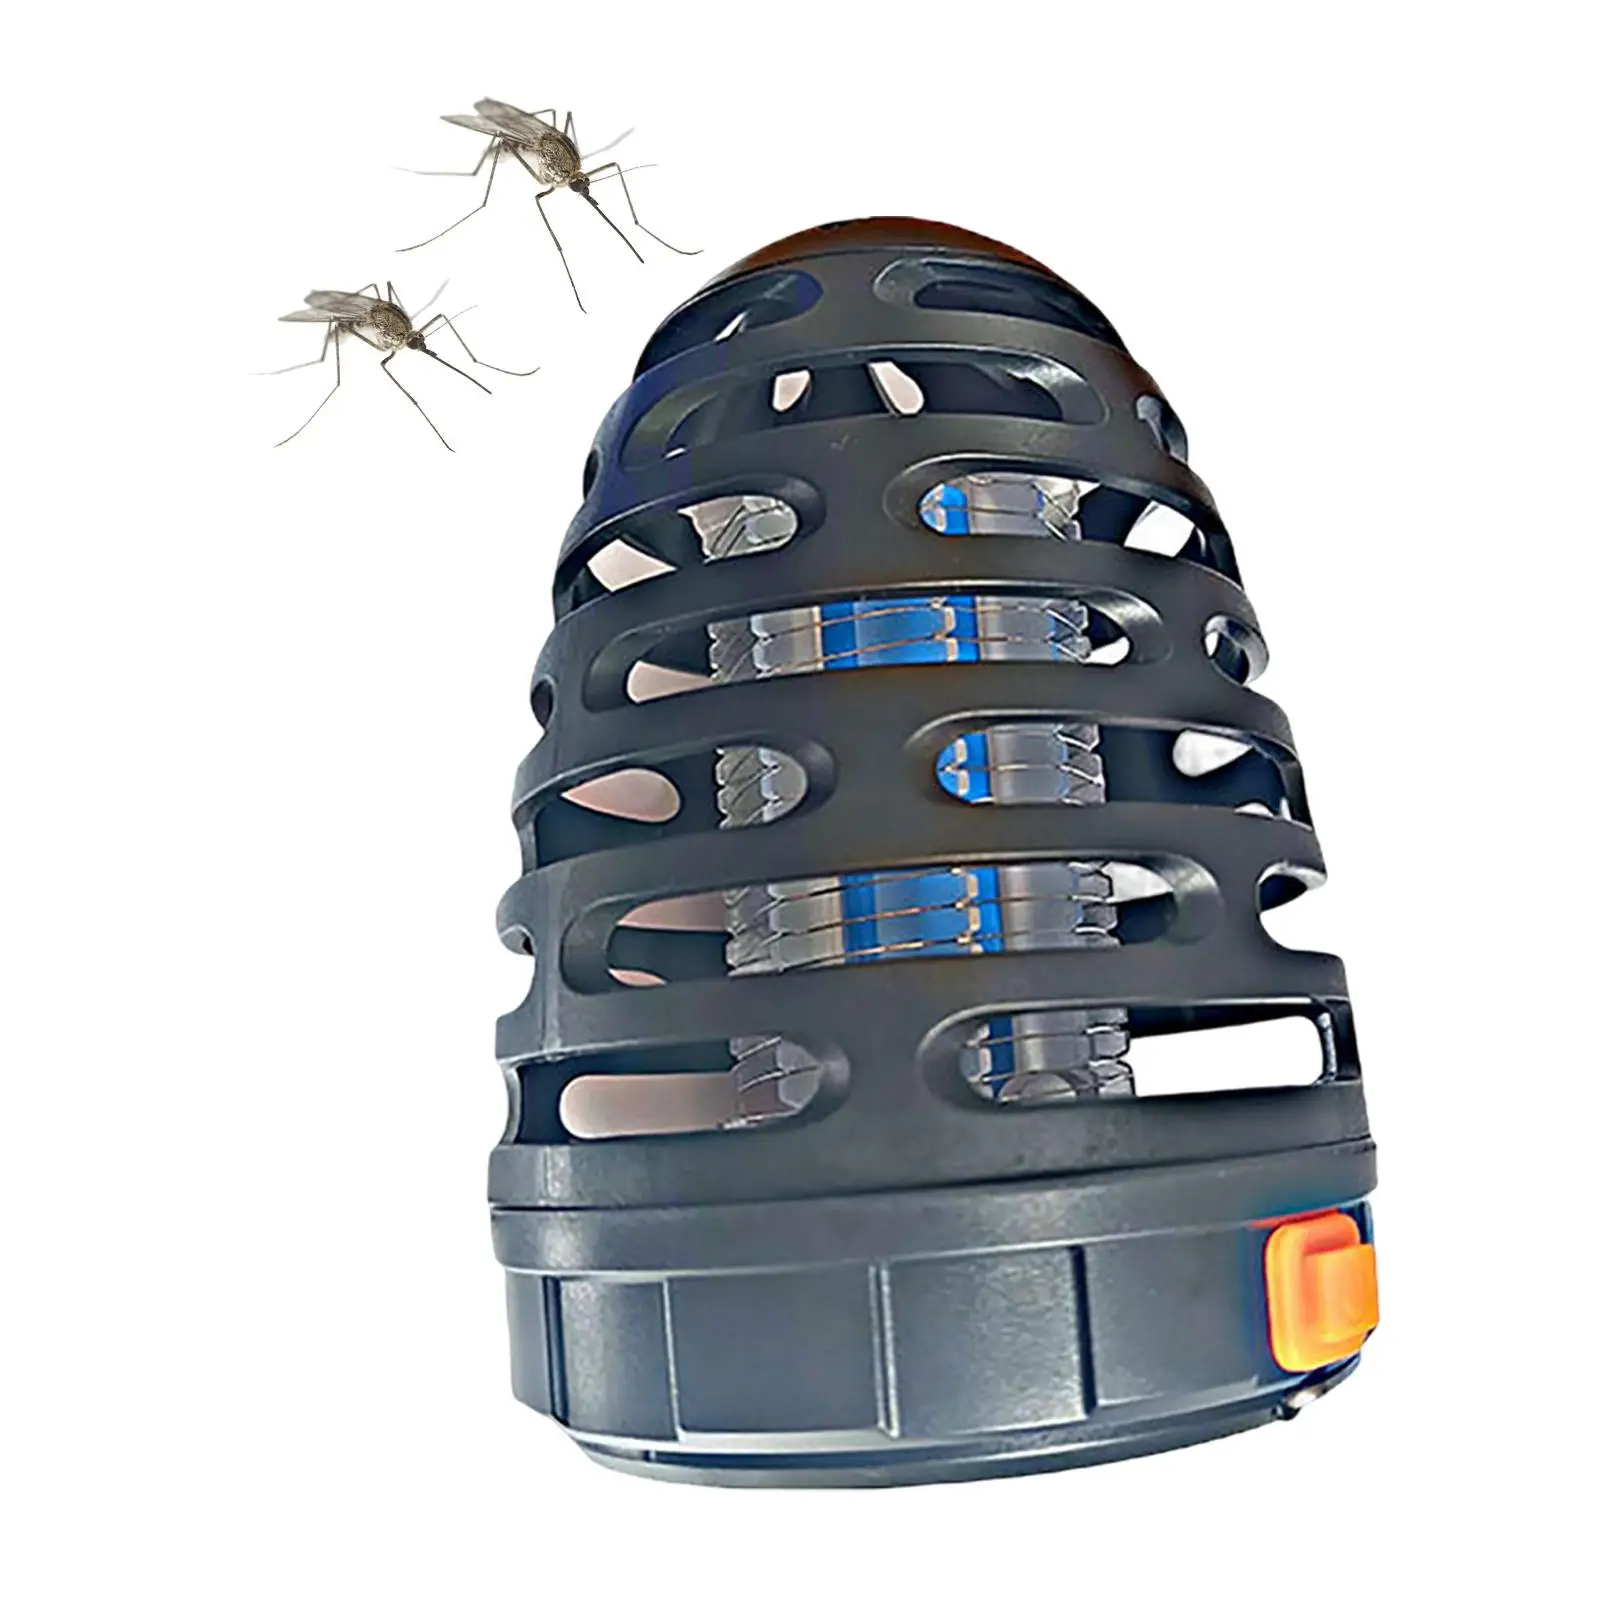 Solar Mosquito Killer Lamp Mosquito Killer, Kill Fly Bug Zapper for Camping Indoor Outdoor Home